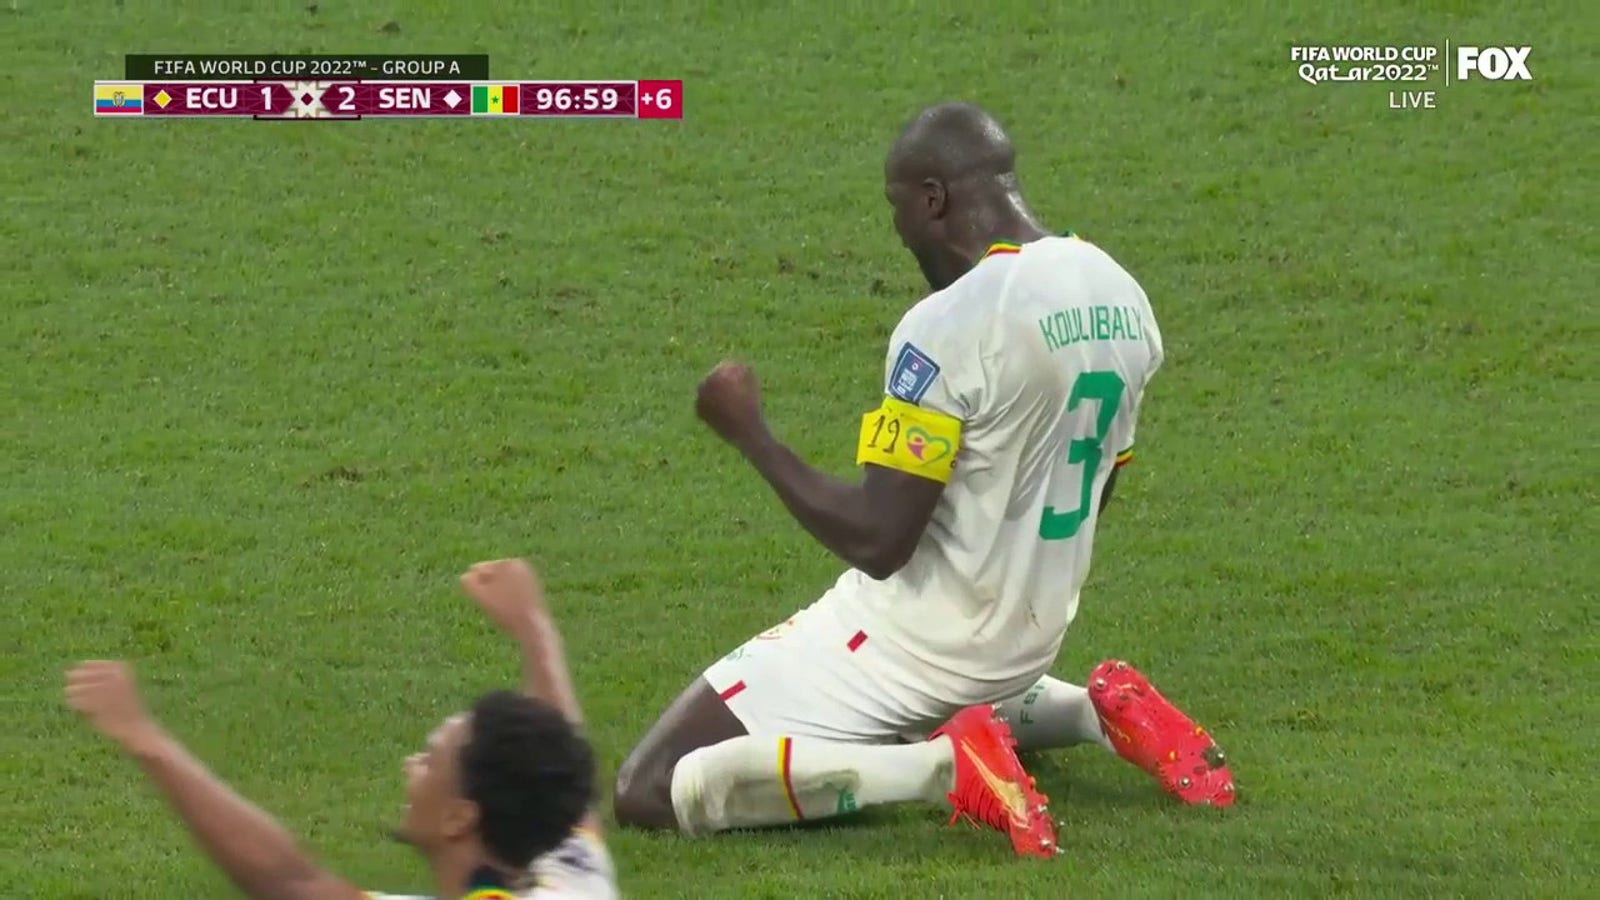 Senegal advances to knockout stage for first time since 2002